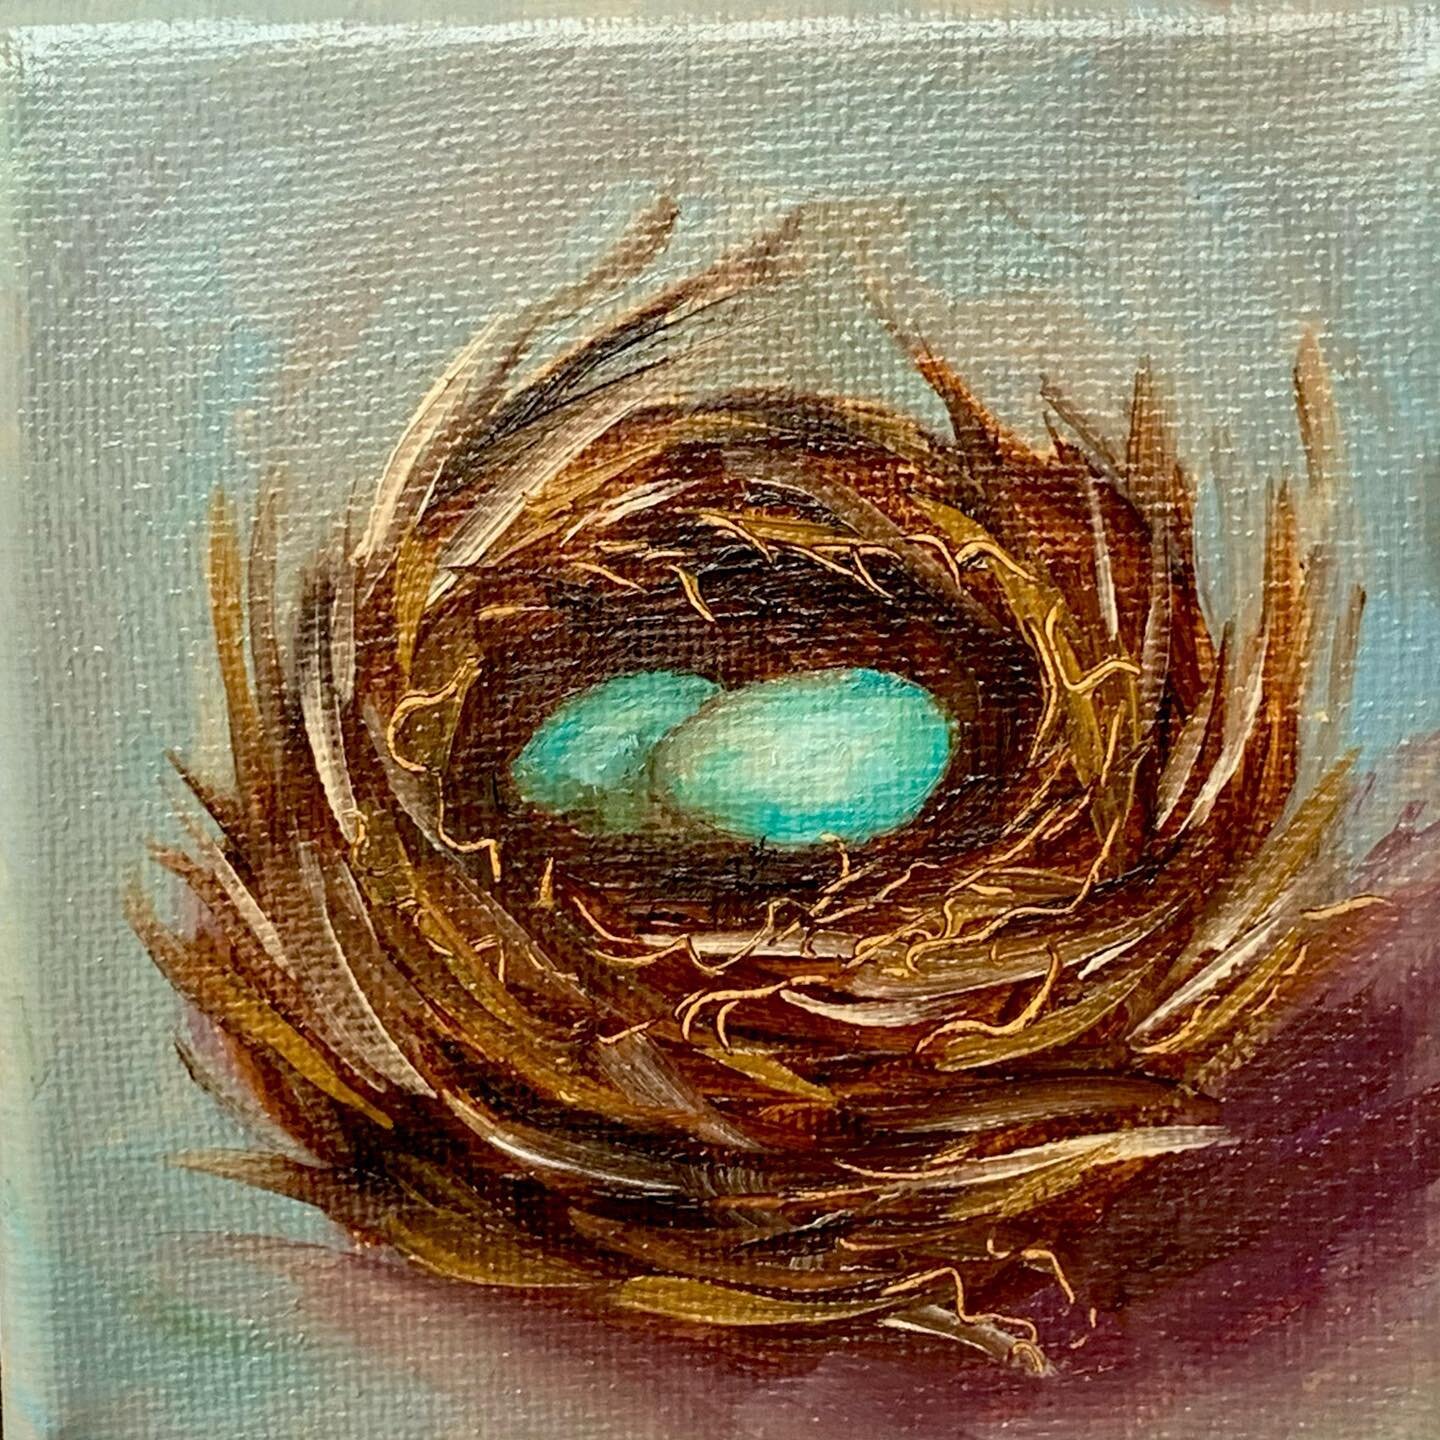 🎨Nest with oils 3.0
Cannot stop doing nests!🤷&zwj;♀️ This is a tiny cutie, 3&rdquo; x 3&rdquo; I did while talking with an old college friend on the phone for an hour. It makes a nice memory😉
.
.
.
.
.
.
#artoninstagram #oilpainting #birdnestpaint